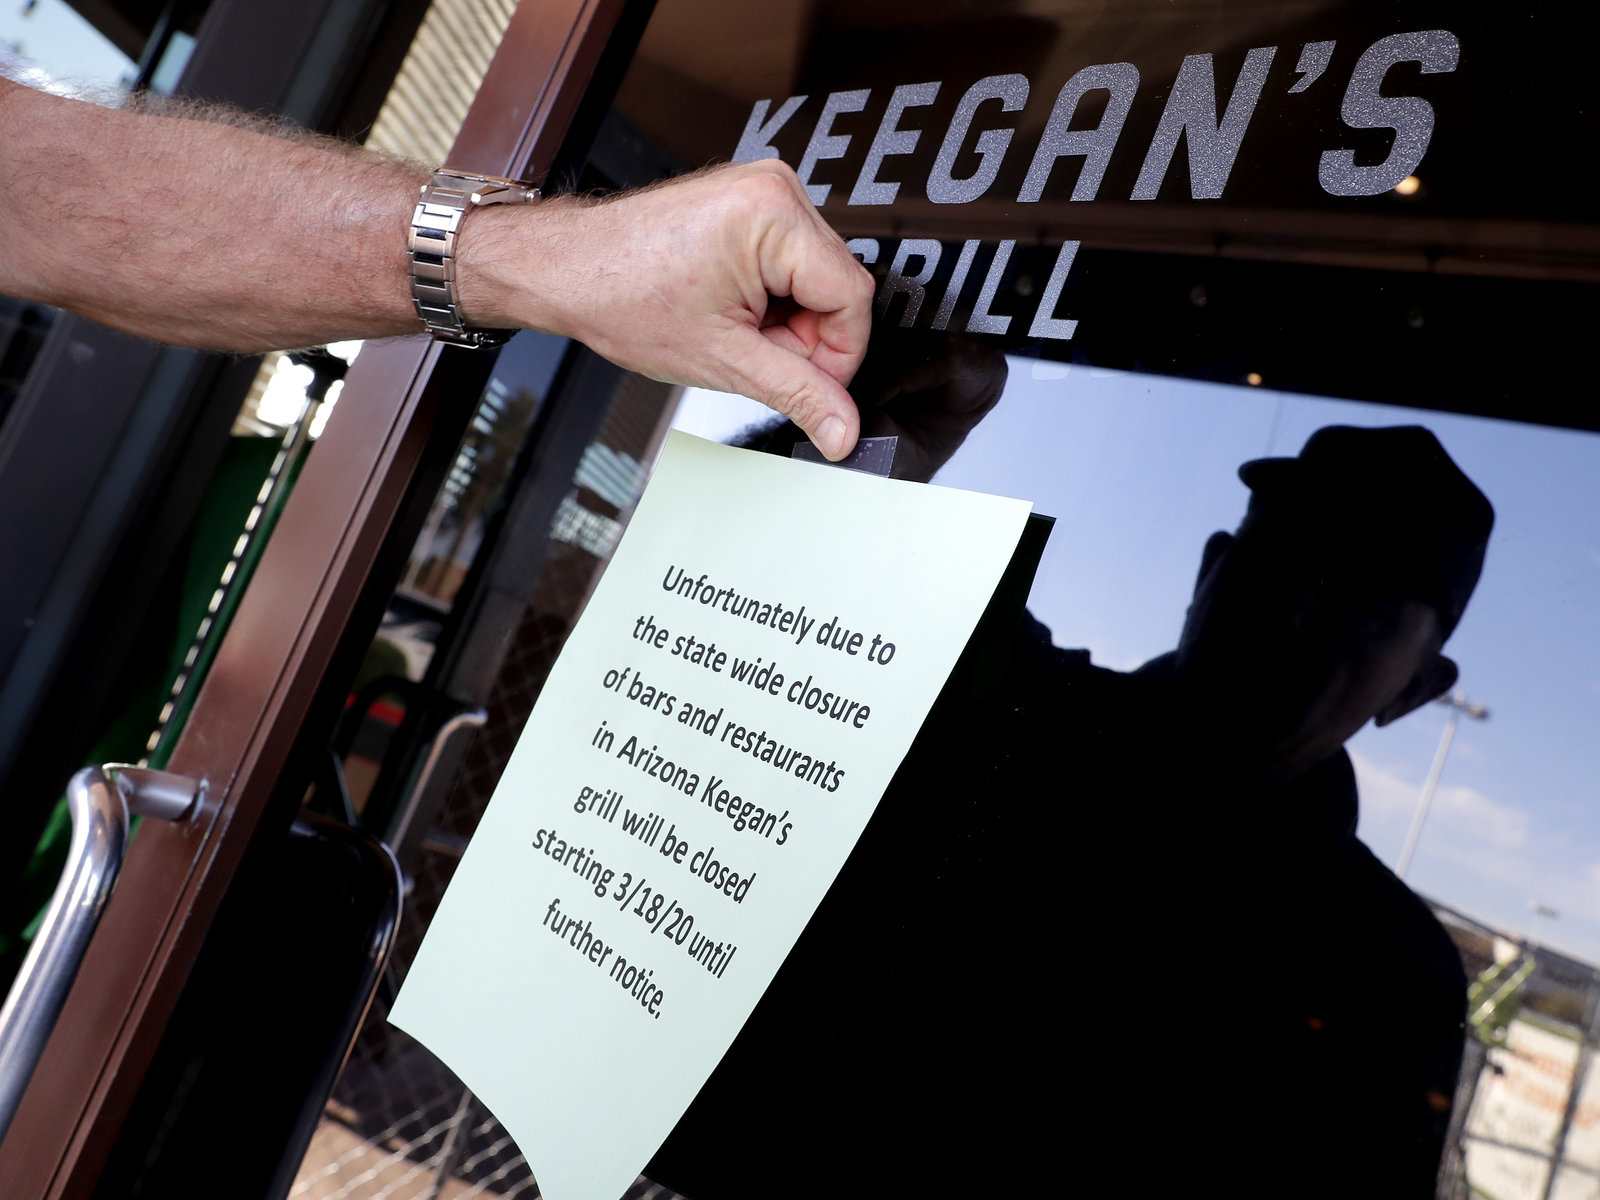 A hand taping a notice to a glass door, announcing the closure of a restaurant in Arizona.